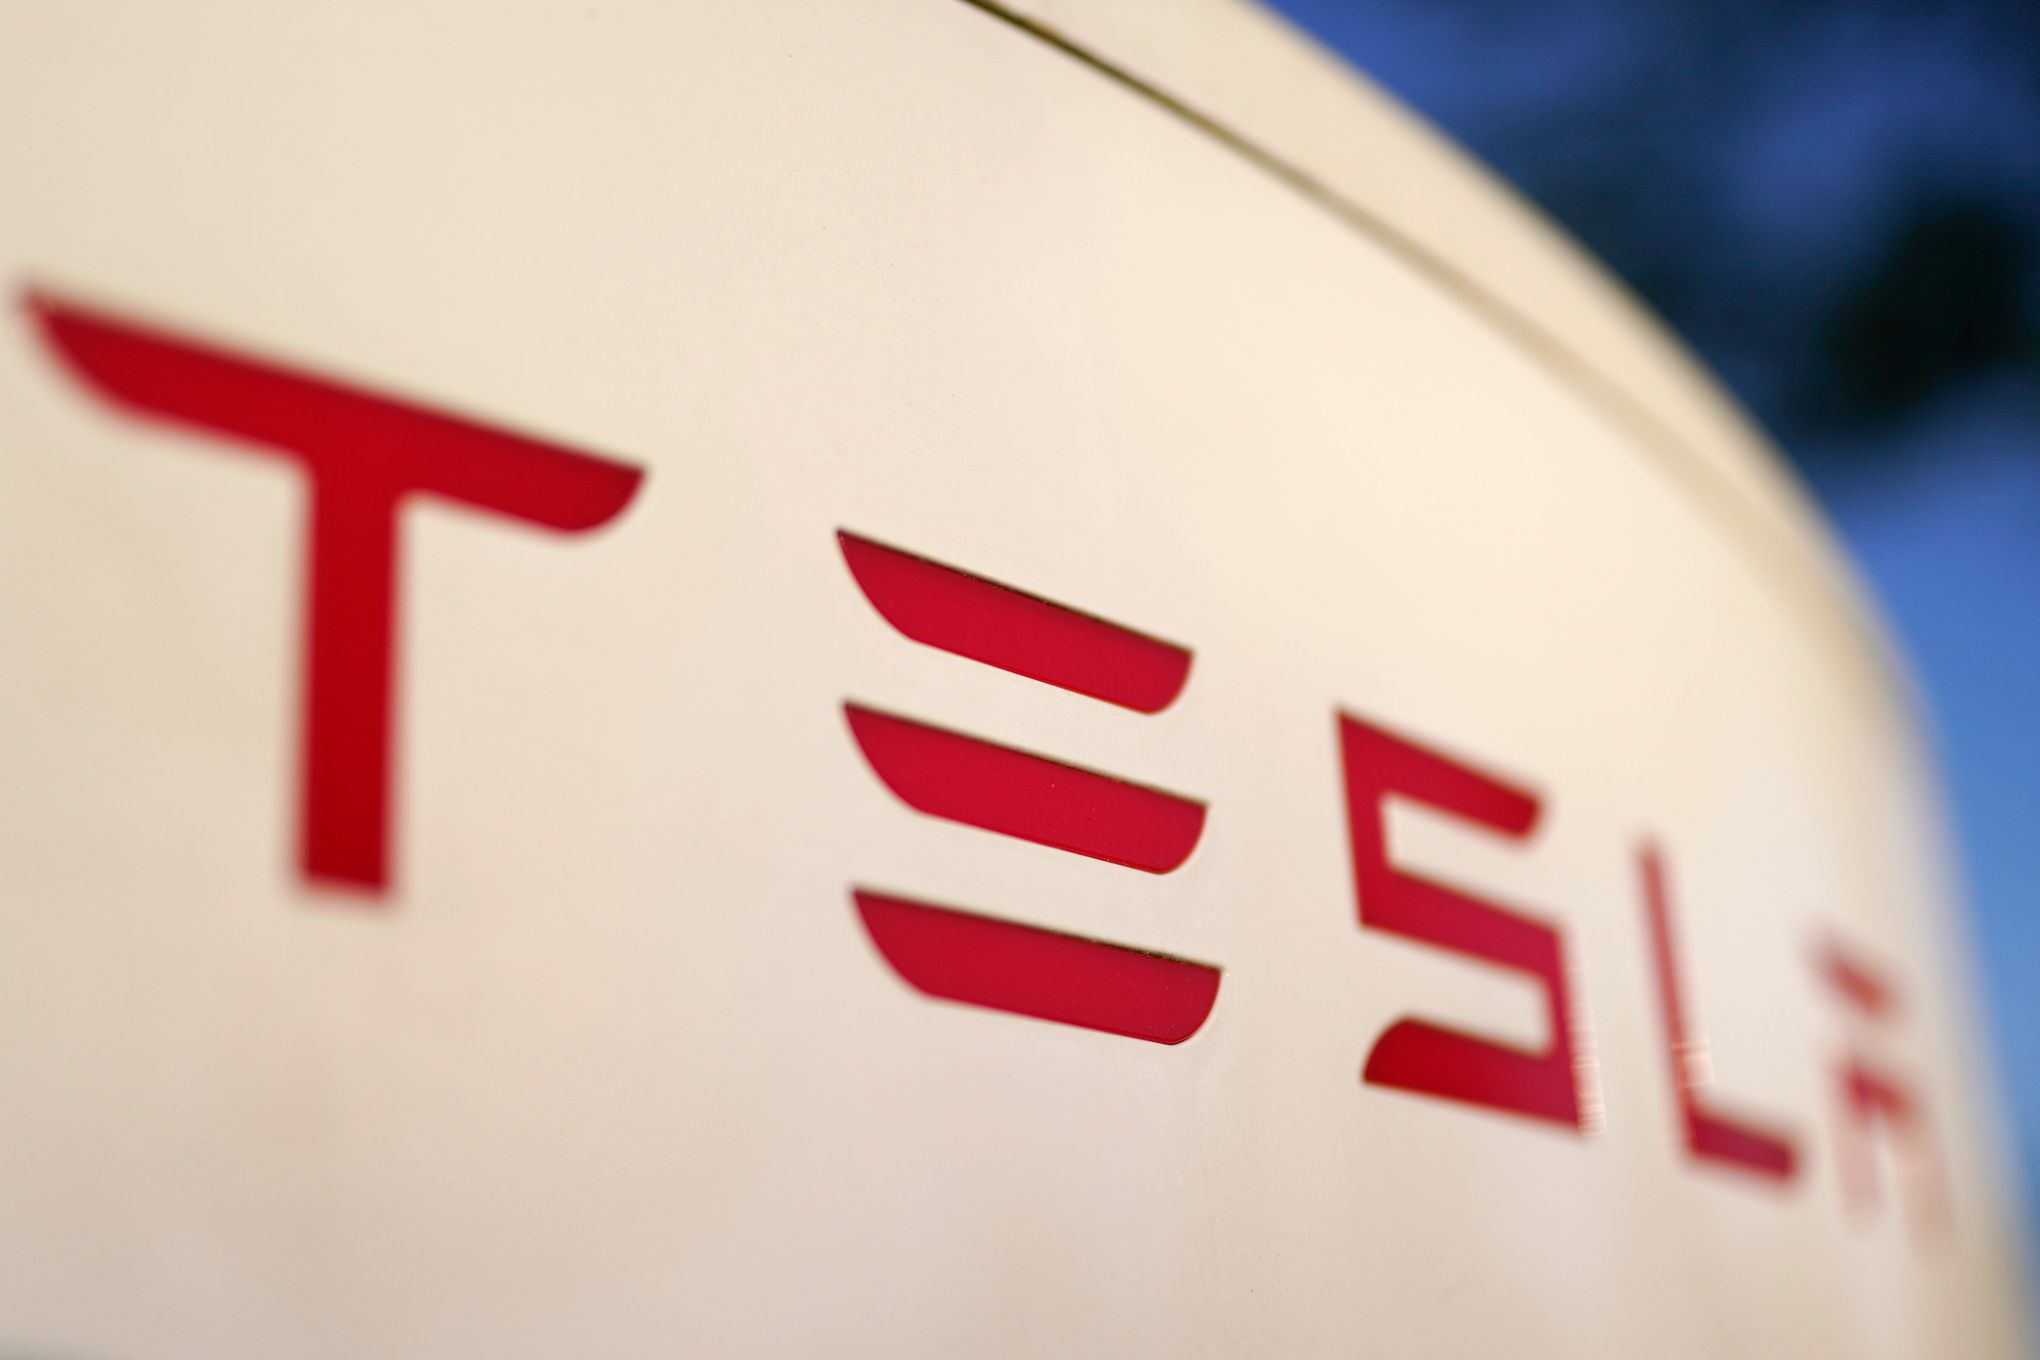 Tesla ordered to pay $1.5 million over alleged hazardous waste violations  in California